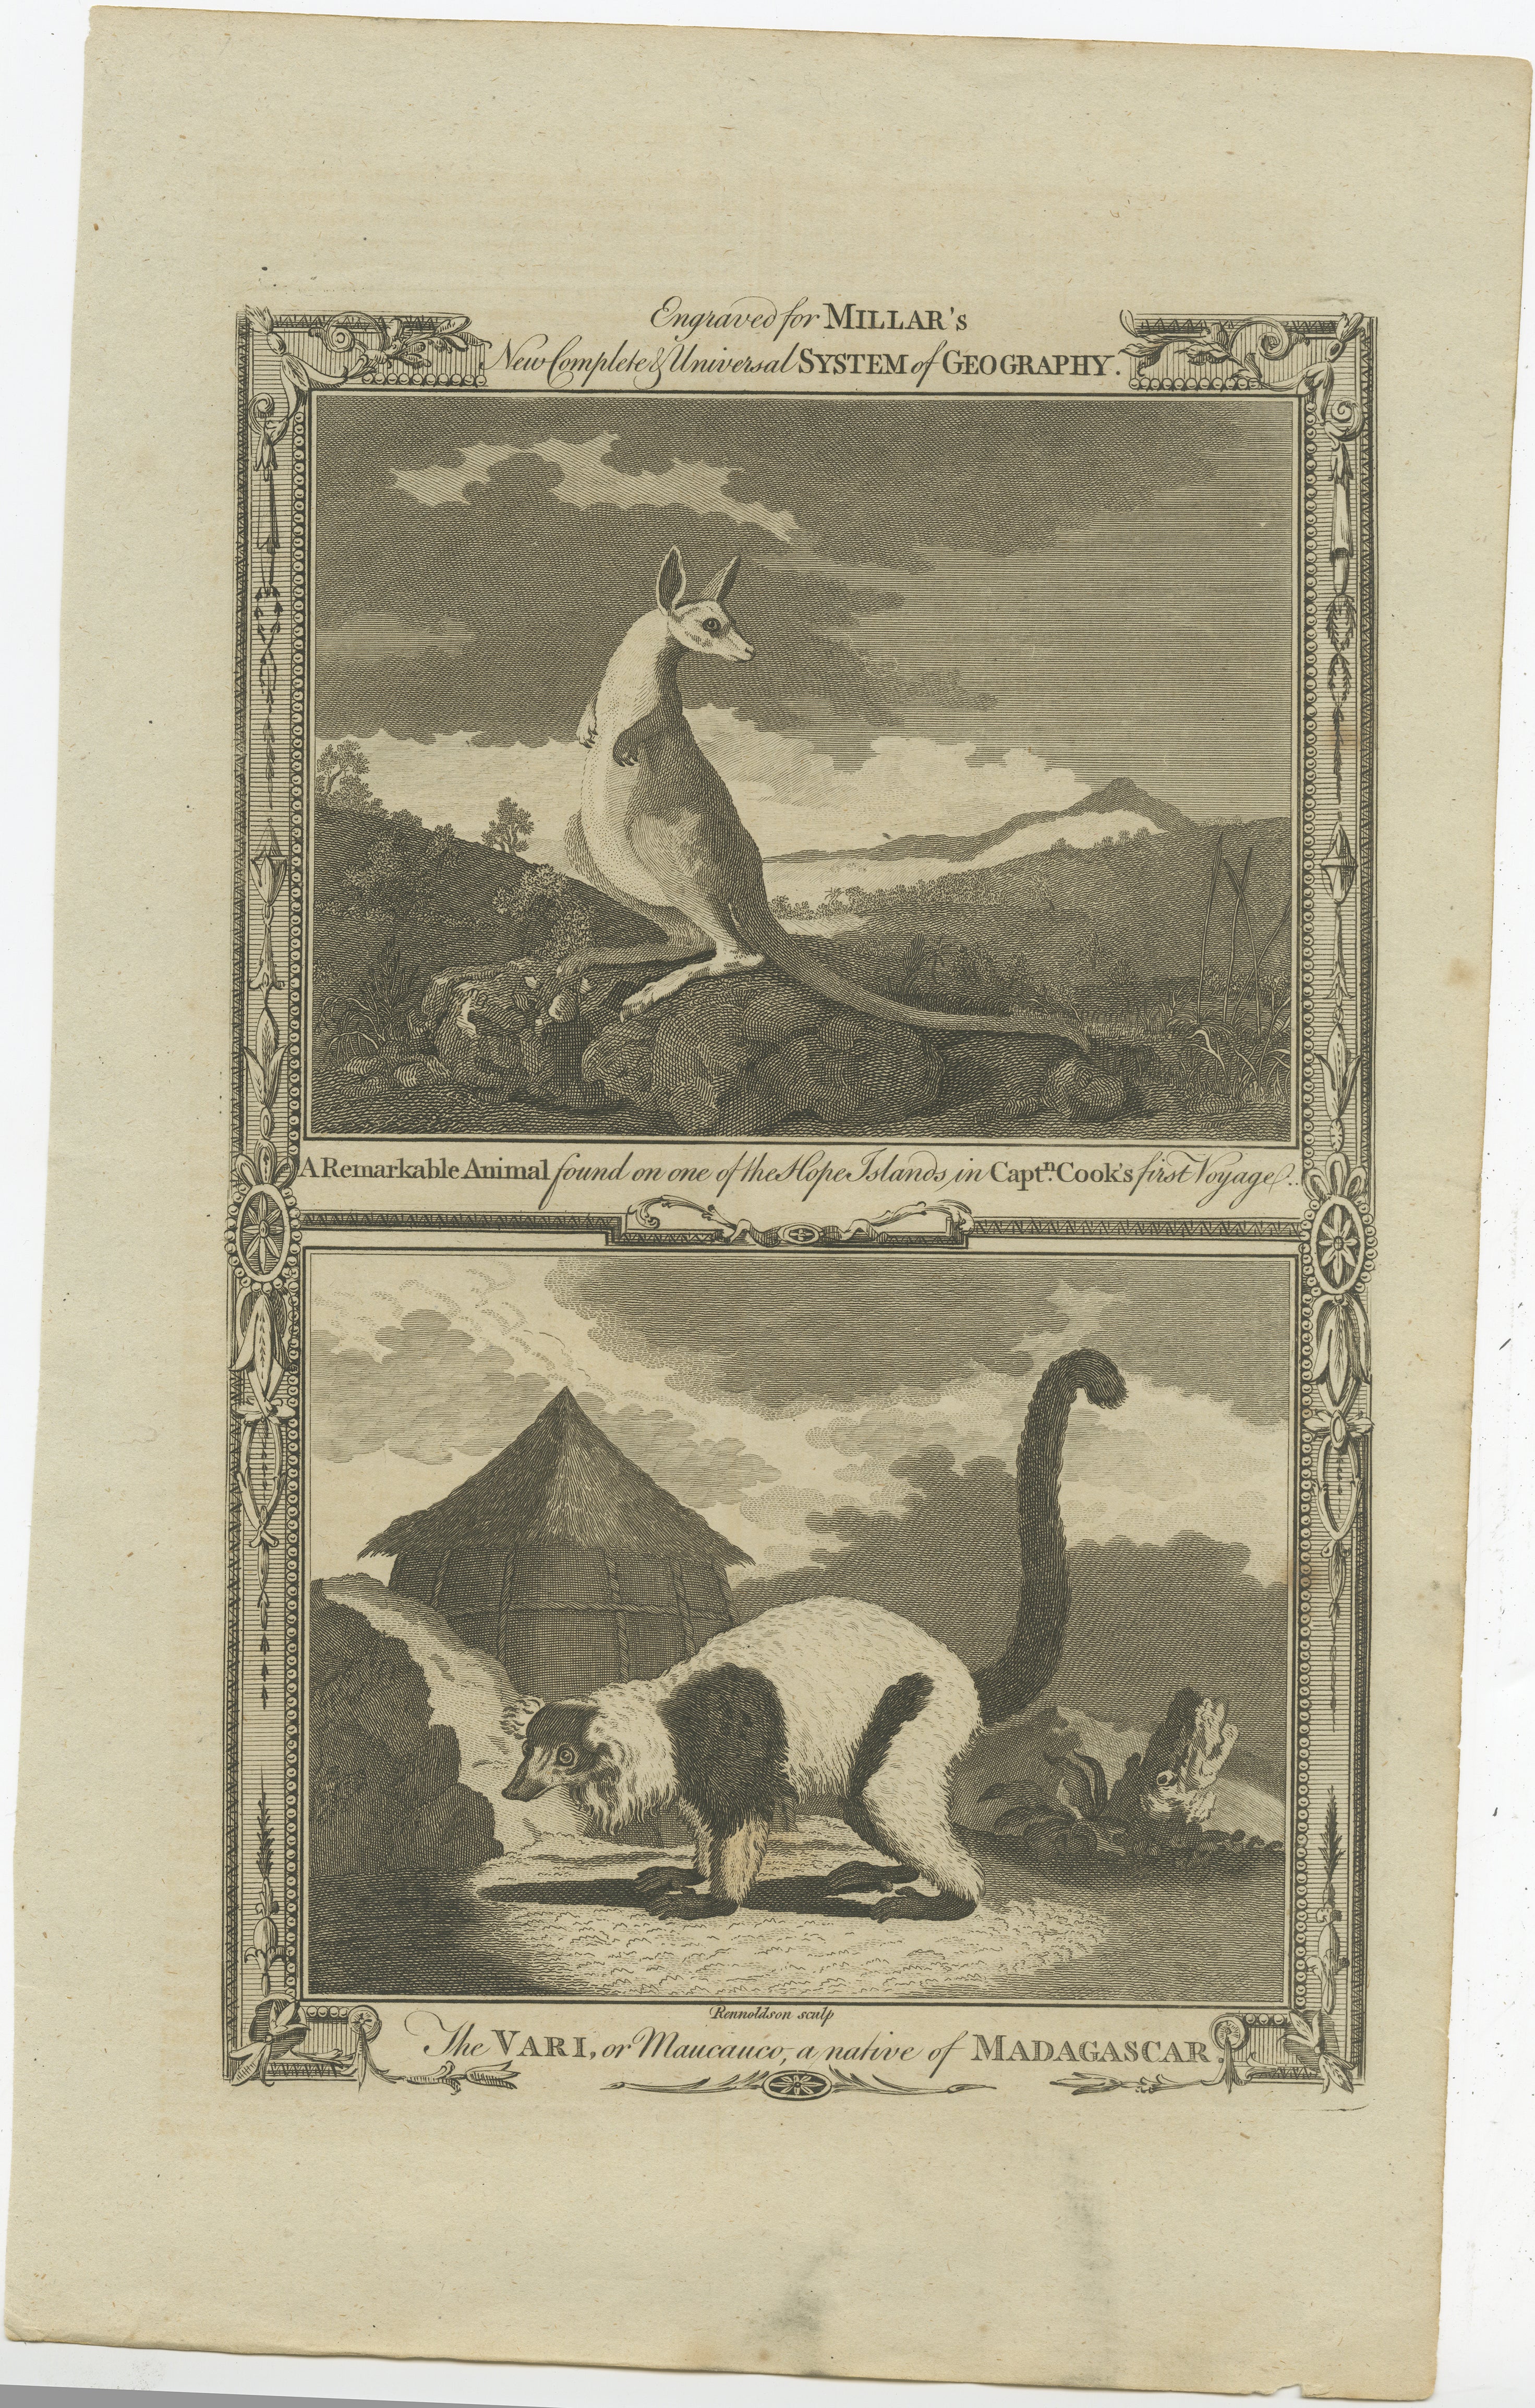 Engraving by Rennoldson (18th Century British School) with nice decorative border. 

1) A Remarkable Animal Found on One of the Hope Islands in Capt Cook's First Voyage.
2) The Vari or Maucauco, a native of Madagascar.



Printed by Alex